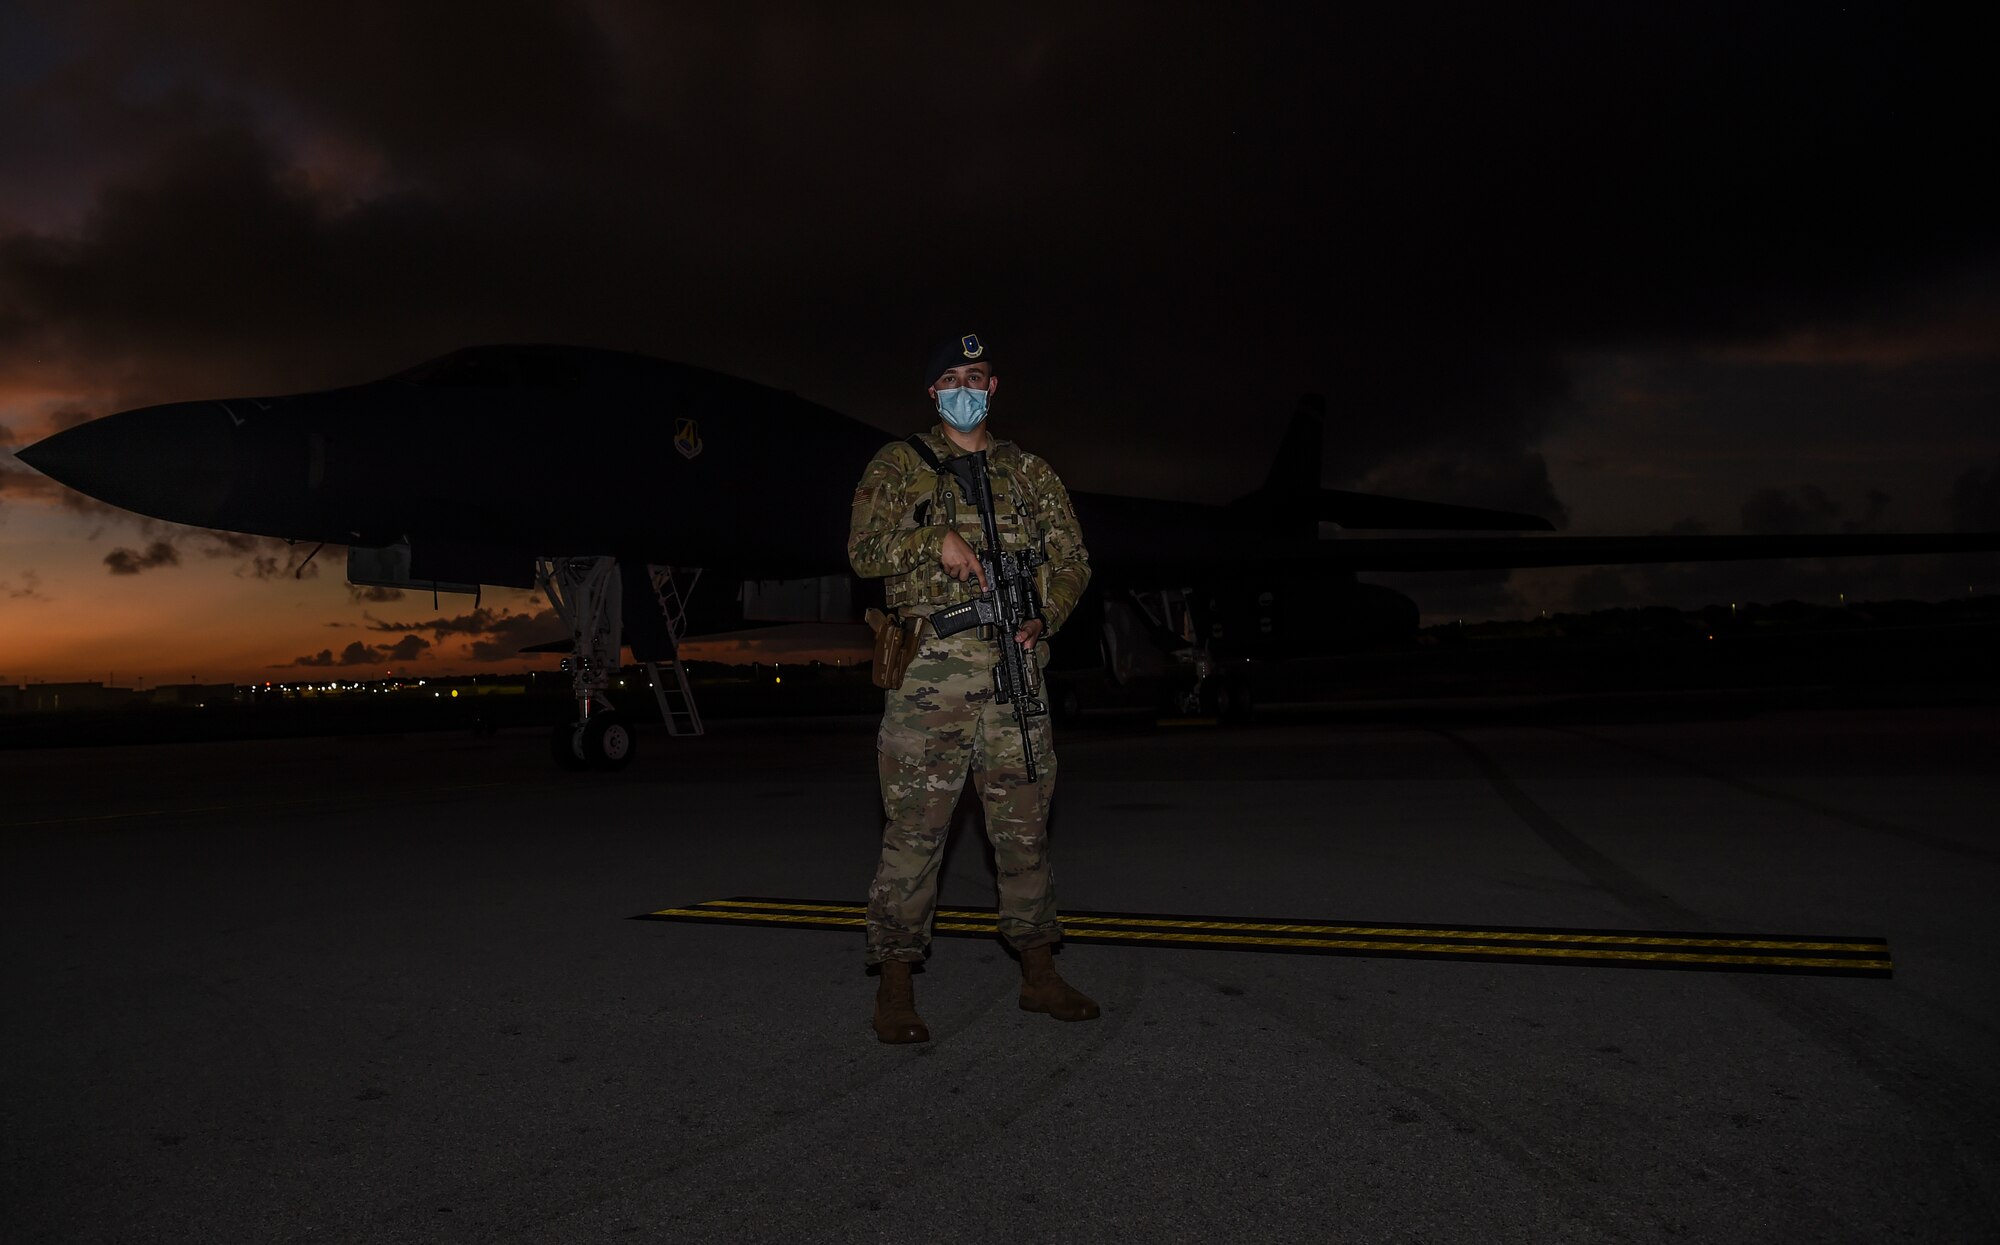 The U.S. Air Force security forces officer in-charge with the 9th Expeditionary Bomb Squadron stands near a U.S. Air Force B-1B Lancer on the flightline at Andersen Air Force Base, Guam, Nov. 13, 2020. Security forces personnel provided constant security for the aircraft during the Bomber Task Force deployment. (U.S. Air Force photo by Staff Sgt. David Owsianka)